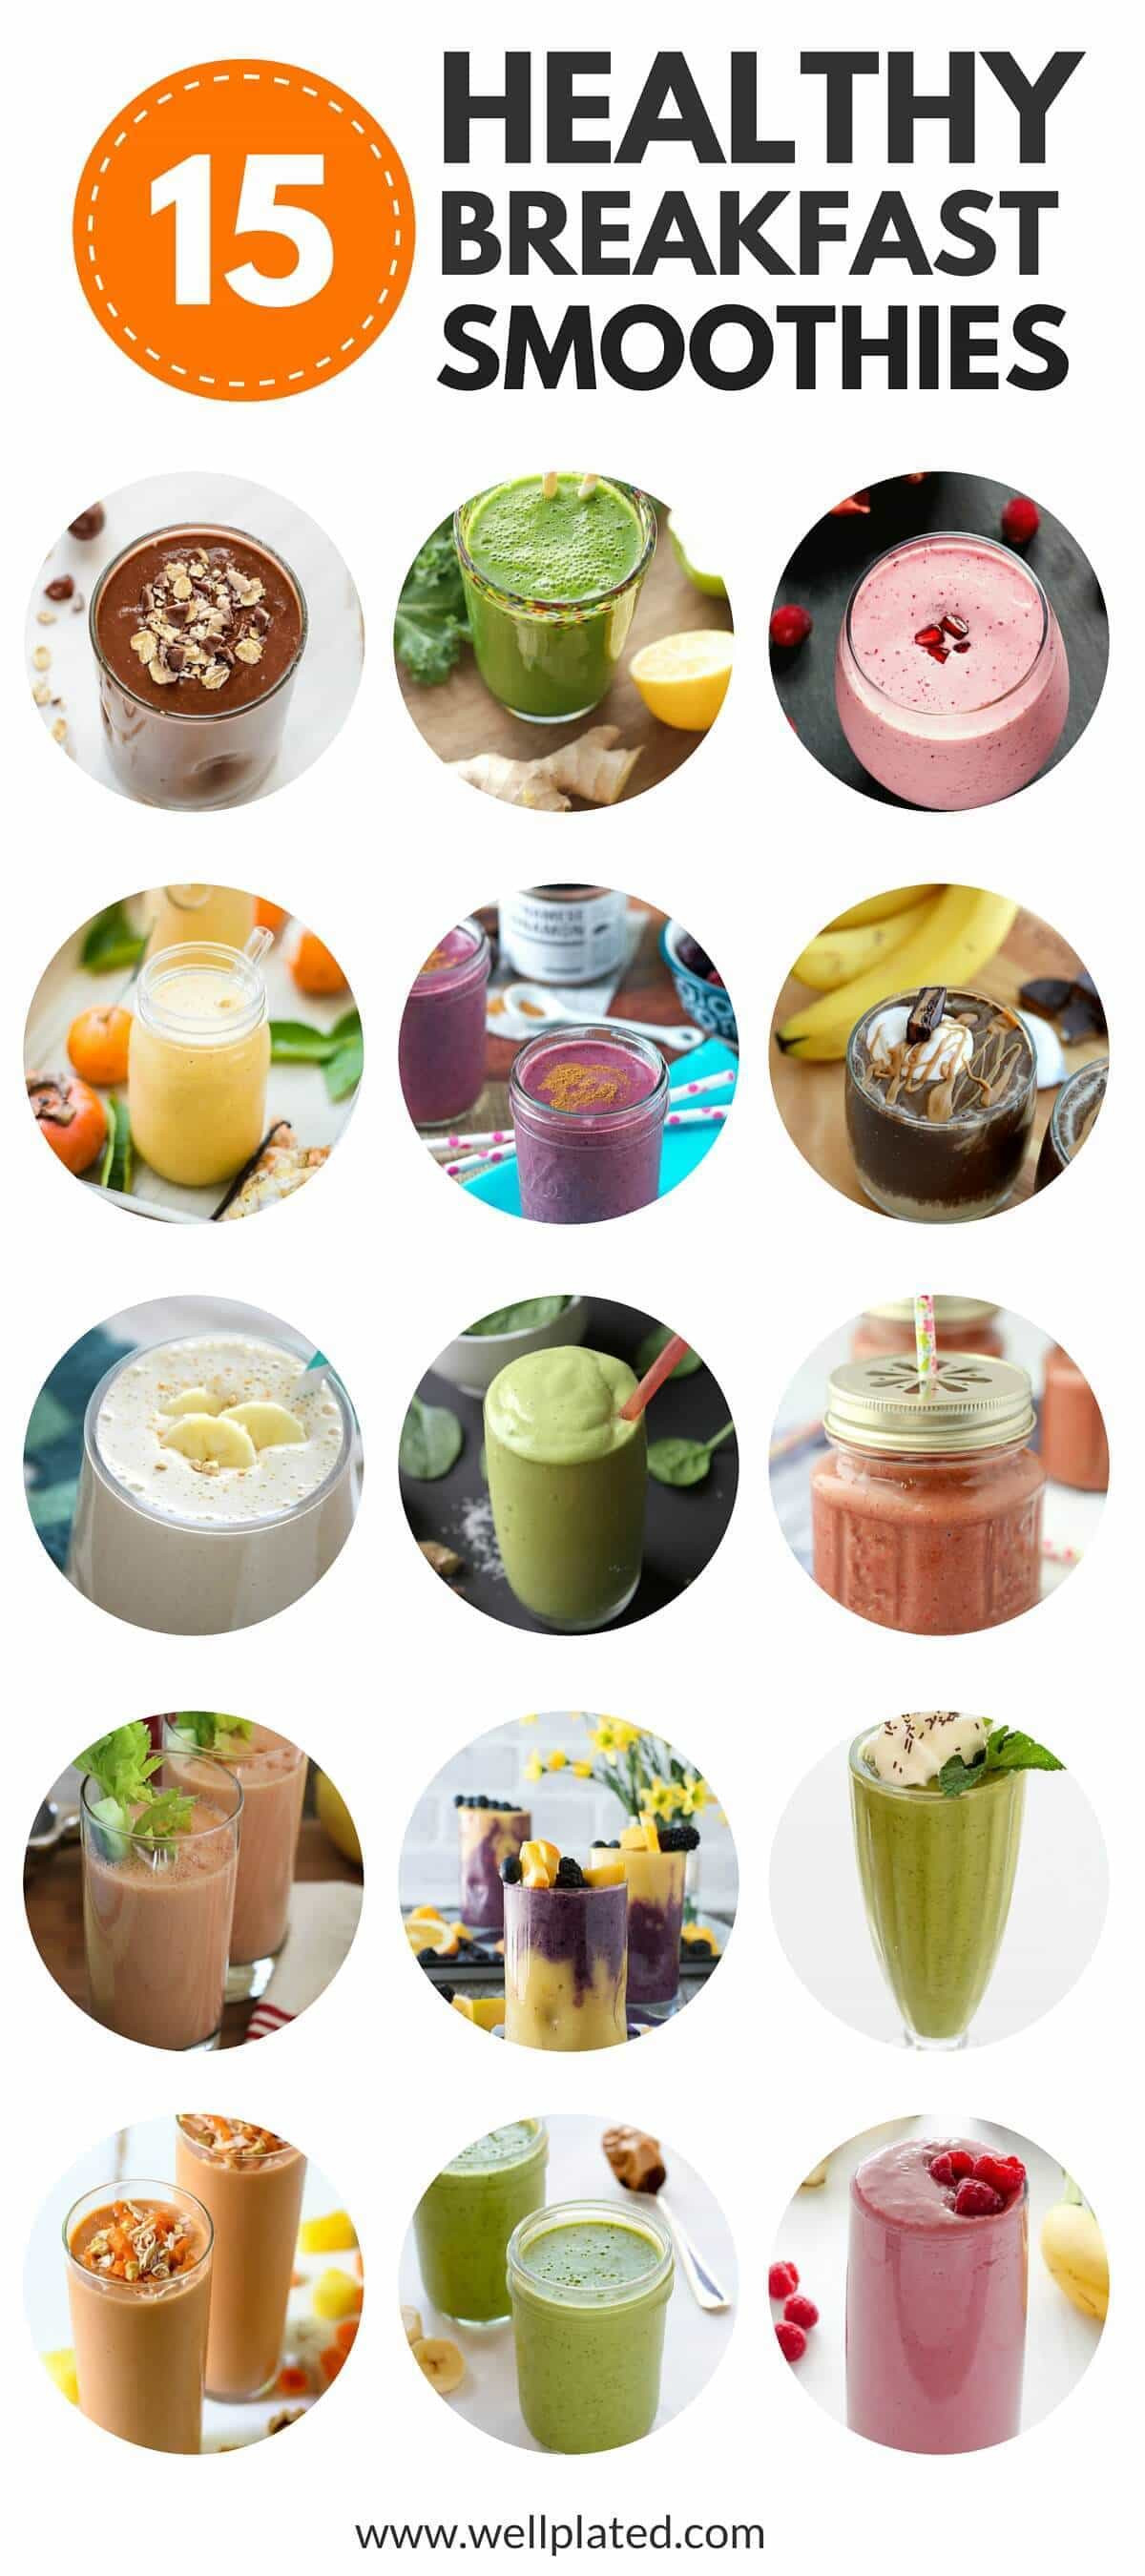 Smoothie Recipes Healthy
 The Best 15 Healthy Breakfast Smoothies